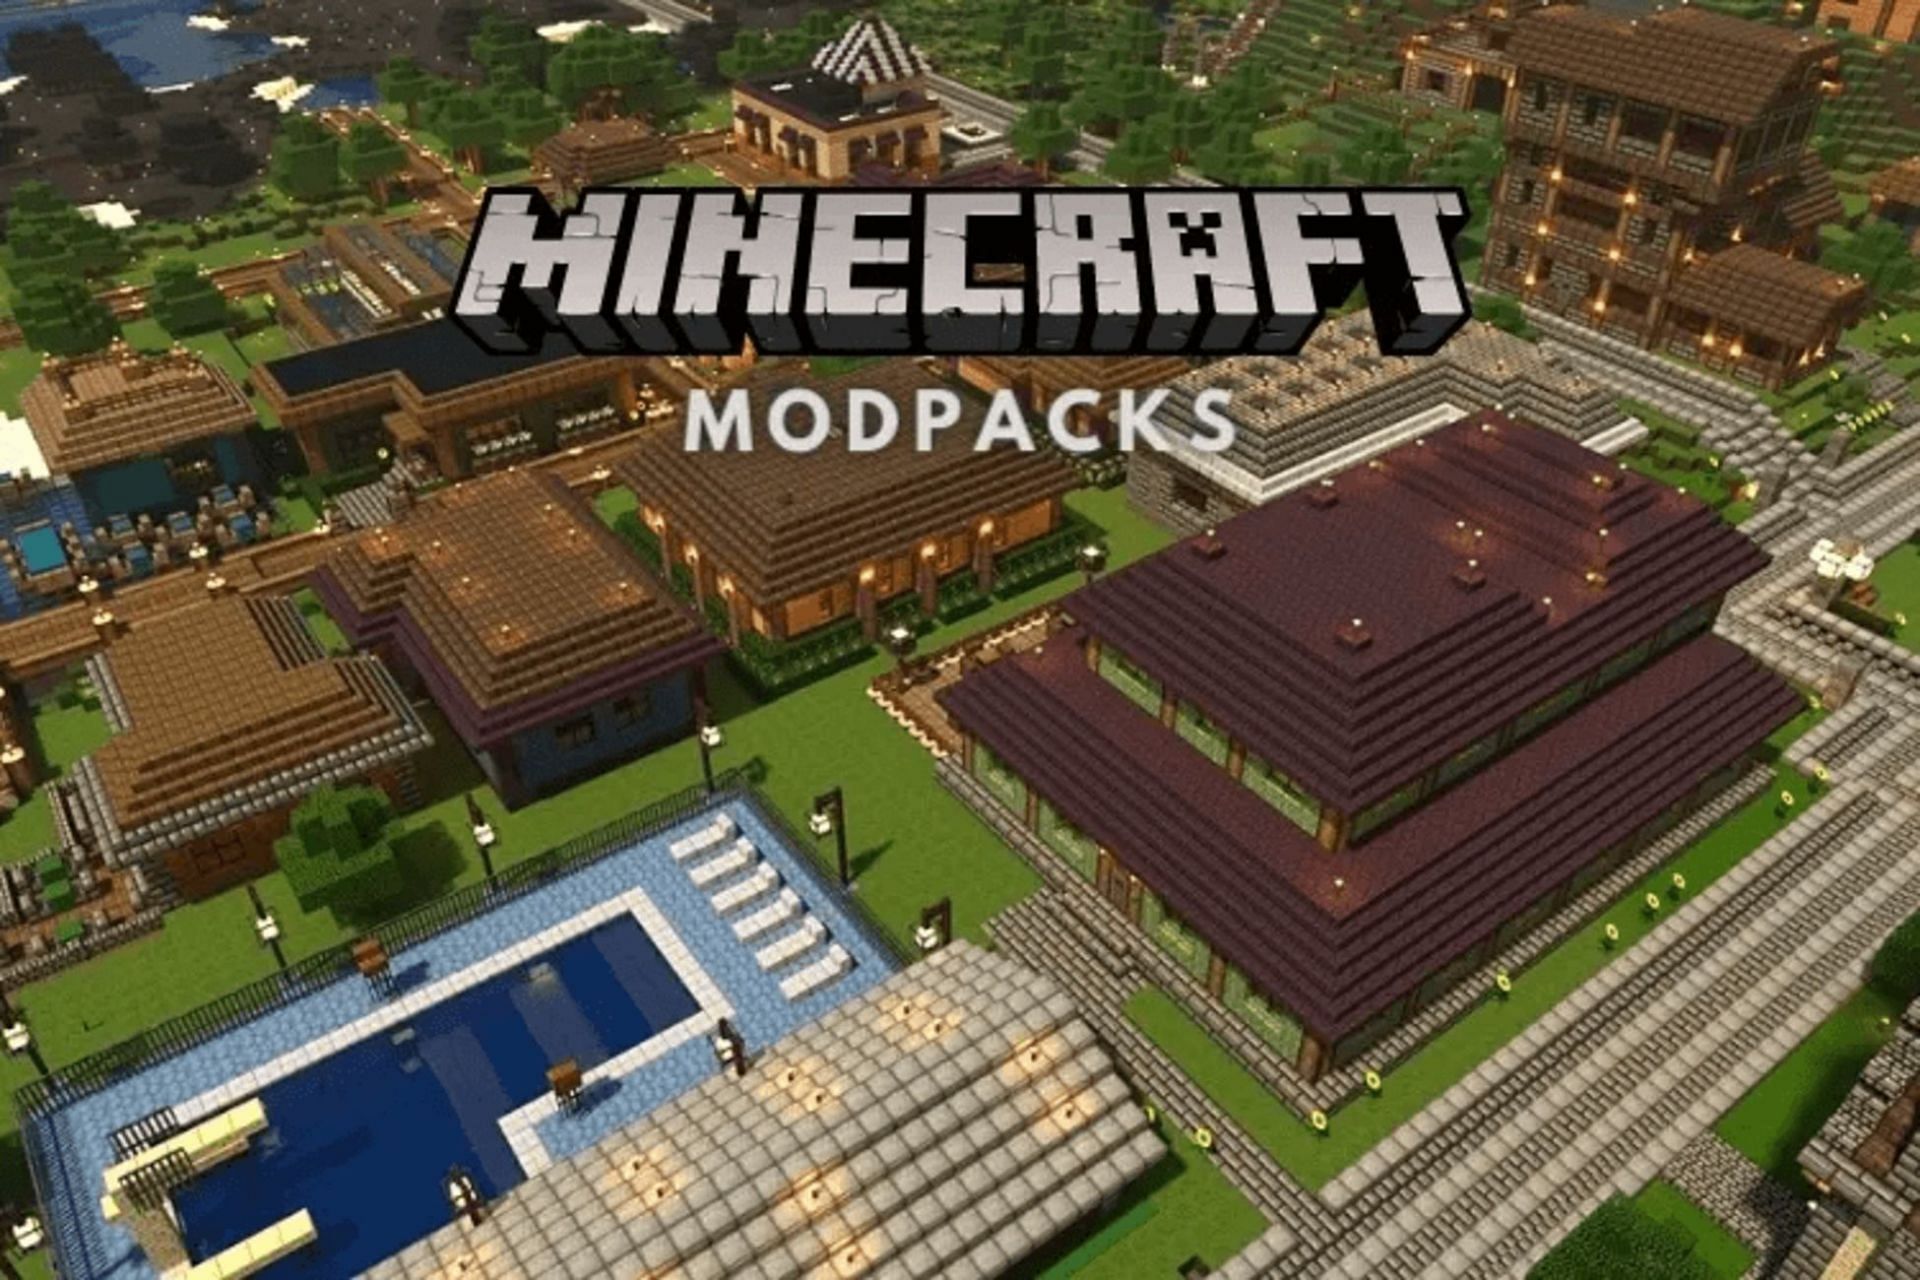 My Vanilla Styled Modpack Crucial 2 just got a new promo image